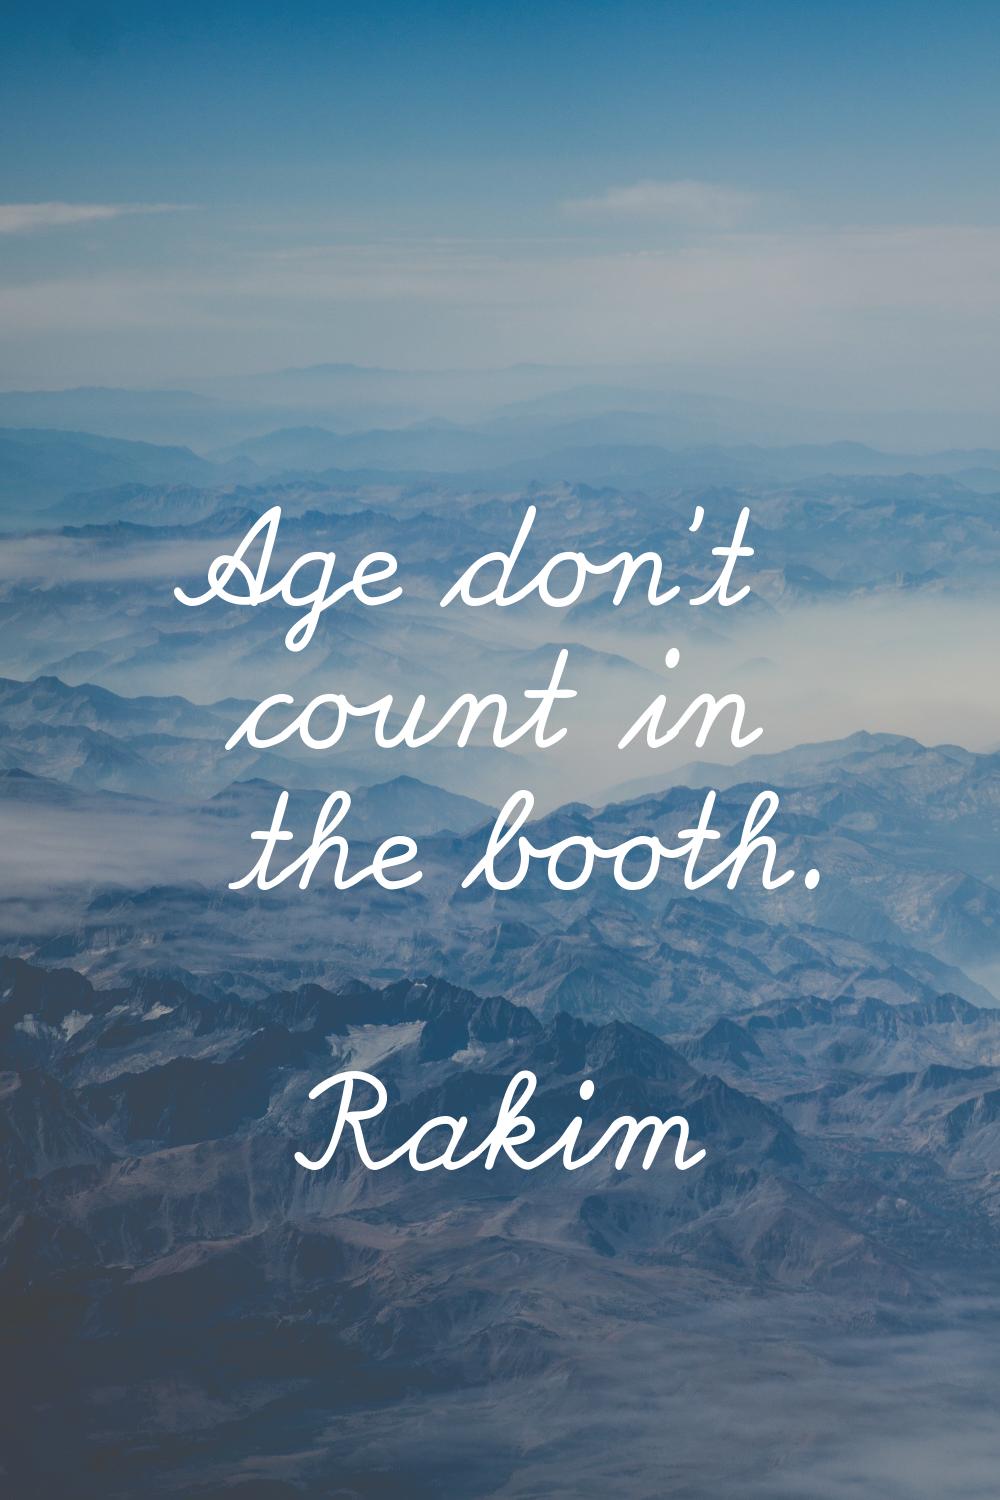 Age don't count in the booth.